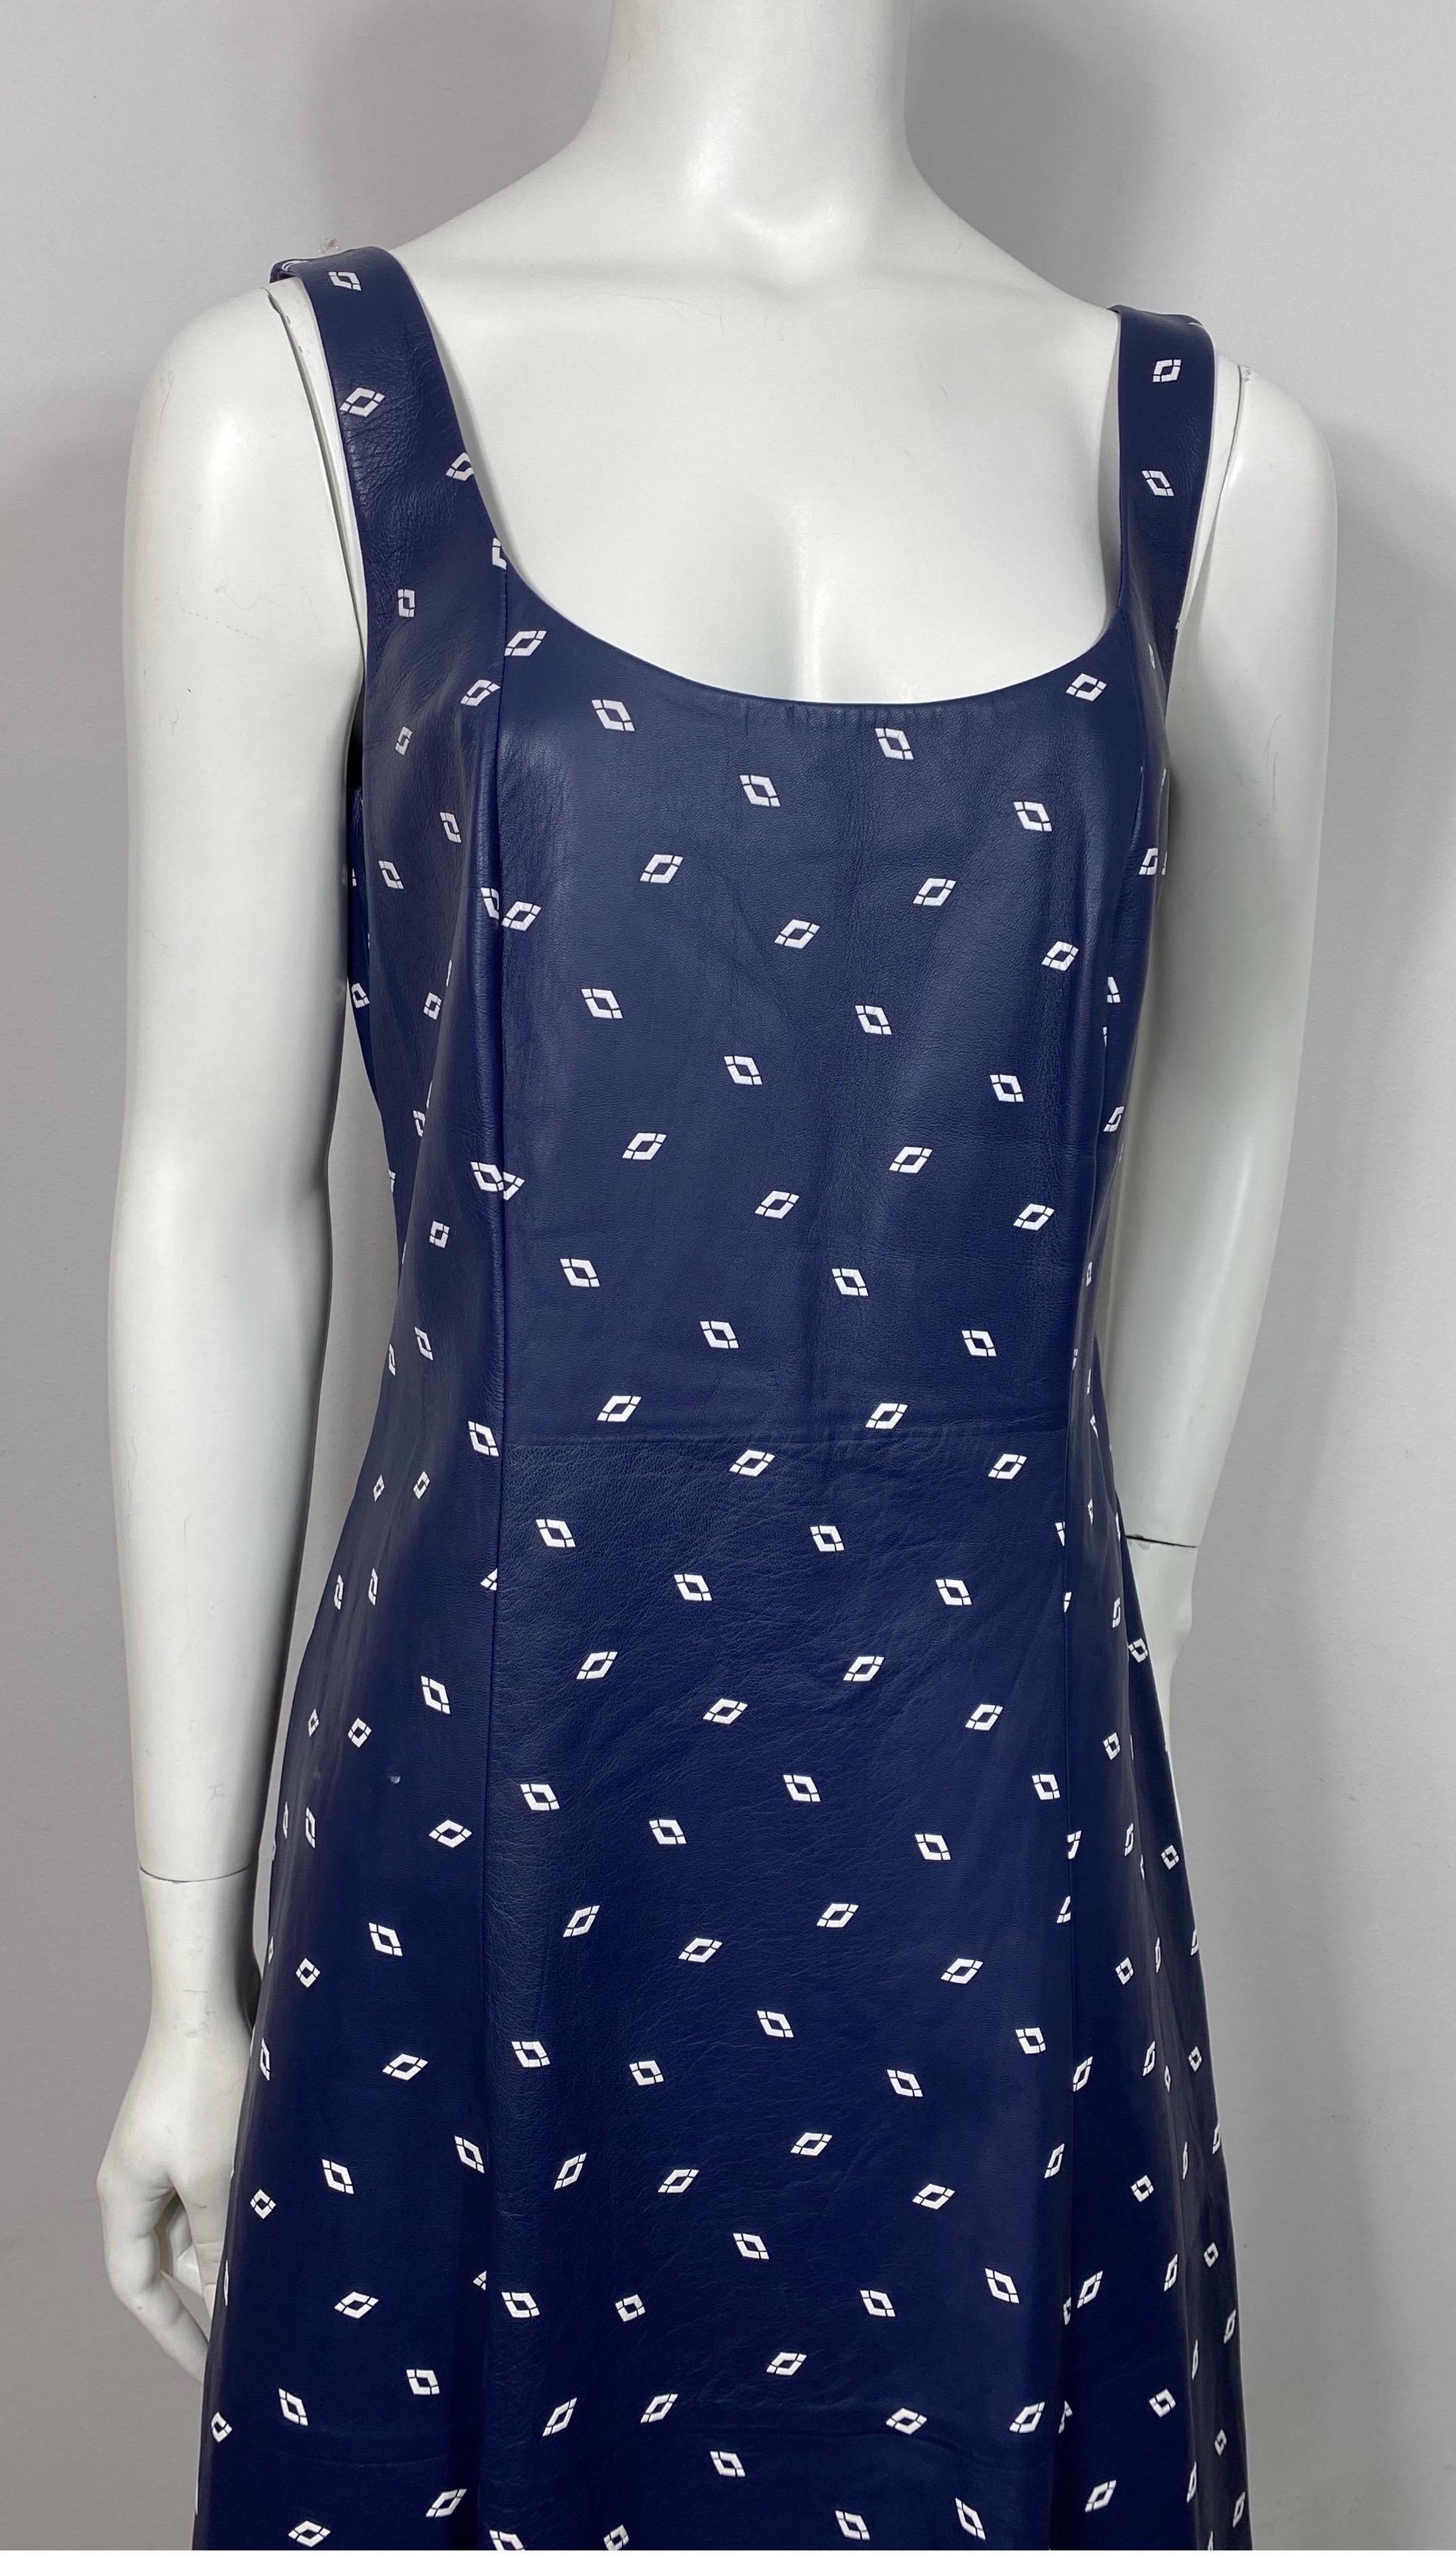 Ralph Lauren Purple Label Navy and White Leather Dress - Size 10 In Excellent Condition For Sale In West Palm Beach, FL